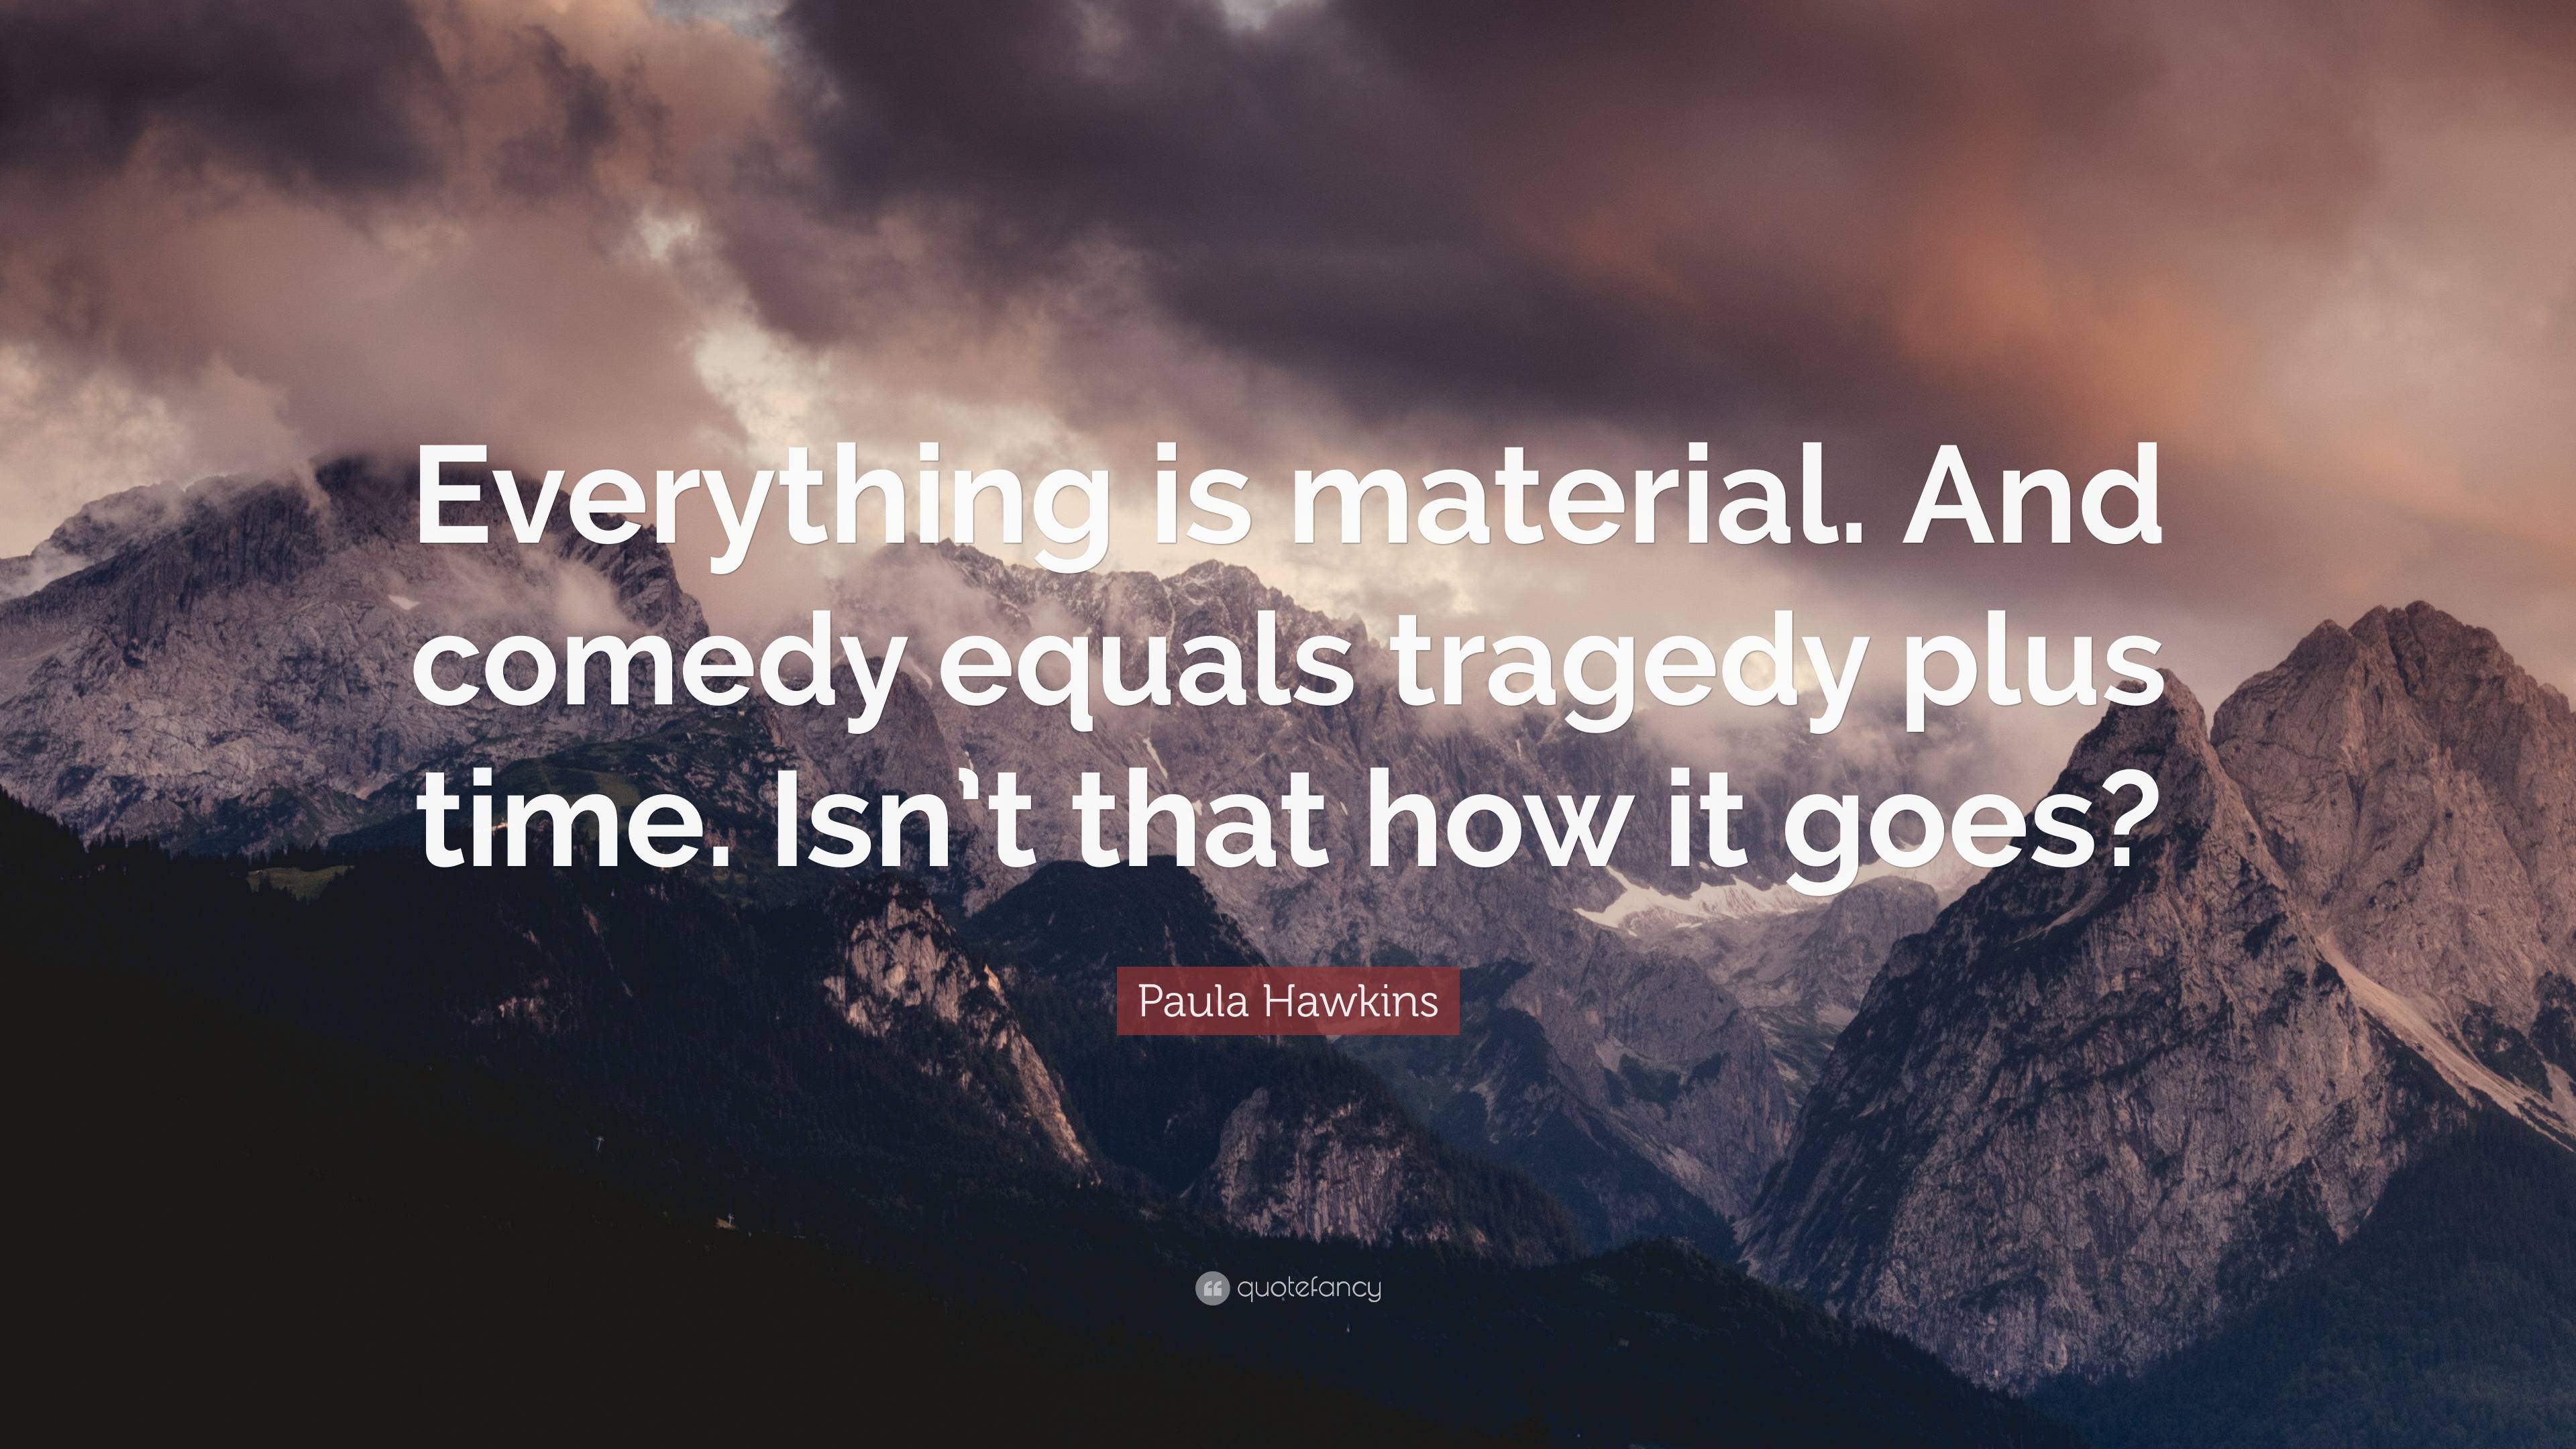 Paula Hawkins Quote: “Everything is material. And comedy equals tragedy plus  time. Isn't that how